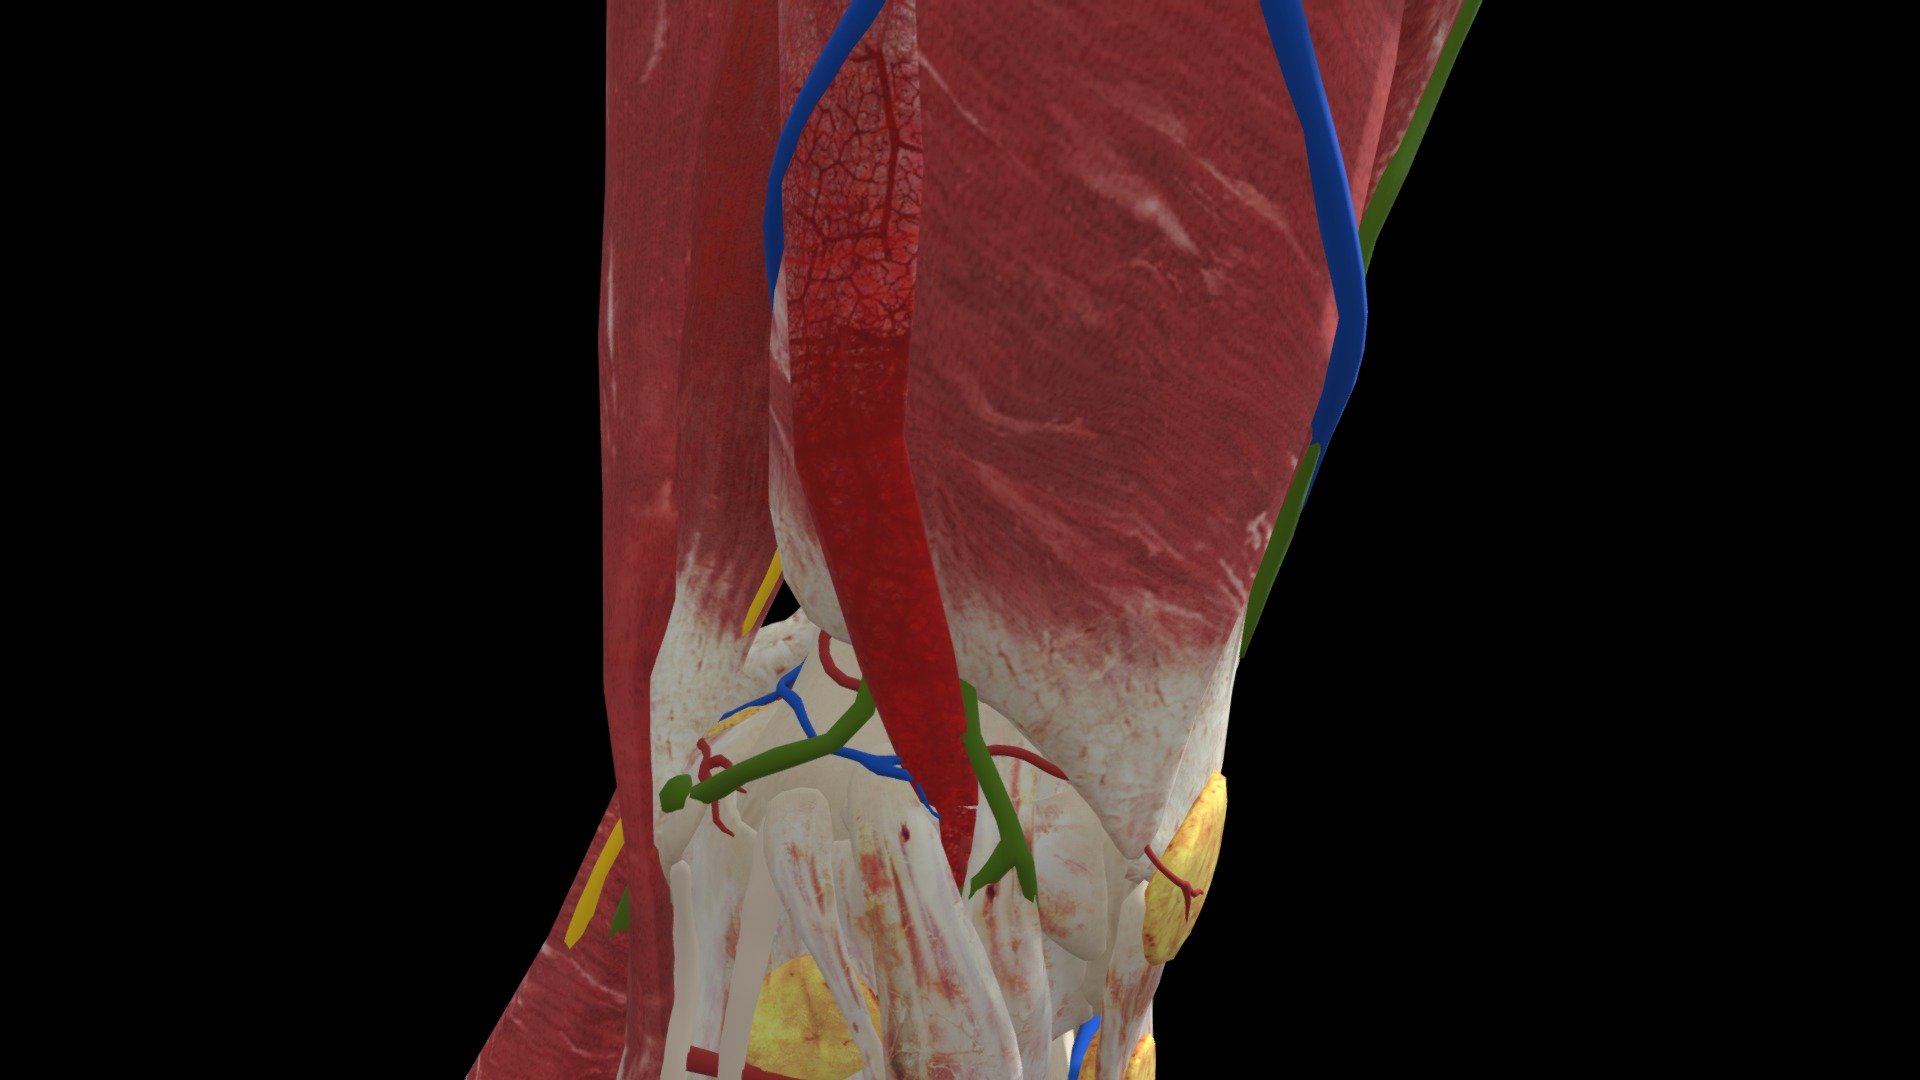 Iliotibial band syndrome is the second most common knee injury caused by inflammation located on the lateral aspect of the knee due to friction between the iliotibial band and the lateral epicondyle of the femur. Pain is felt most commonly on the lateral aspect of the knee and is most intensive at 30 degrees of knee flexion.

This MSK module was funded by: Indiana University School of Medicine. 

All 3D work was completed by: Connections XR - IT band syndrome - 3D model by Znyth 3d model